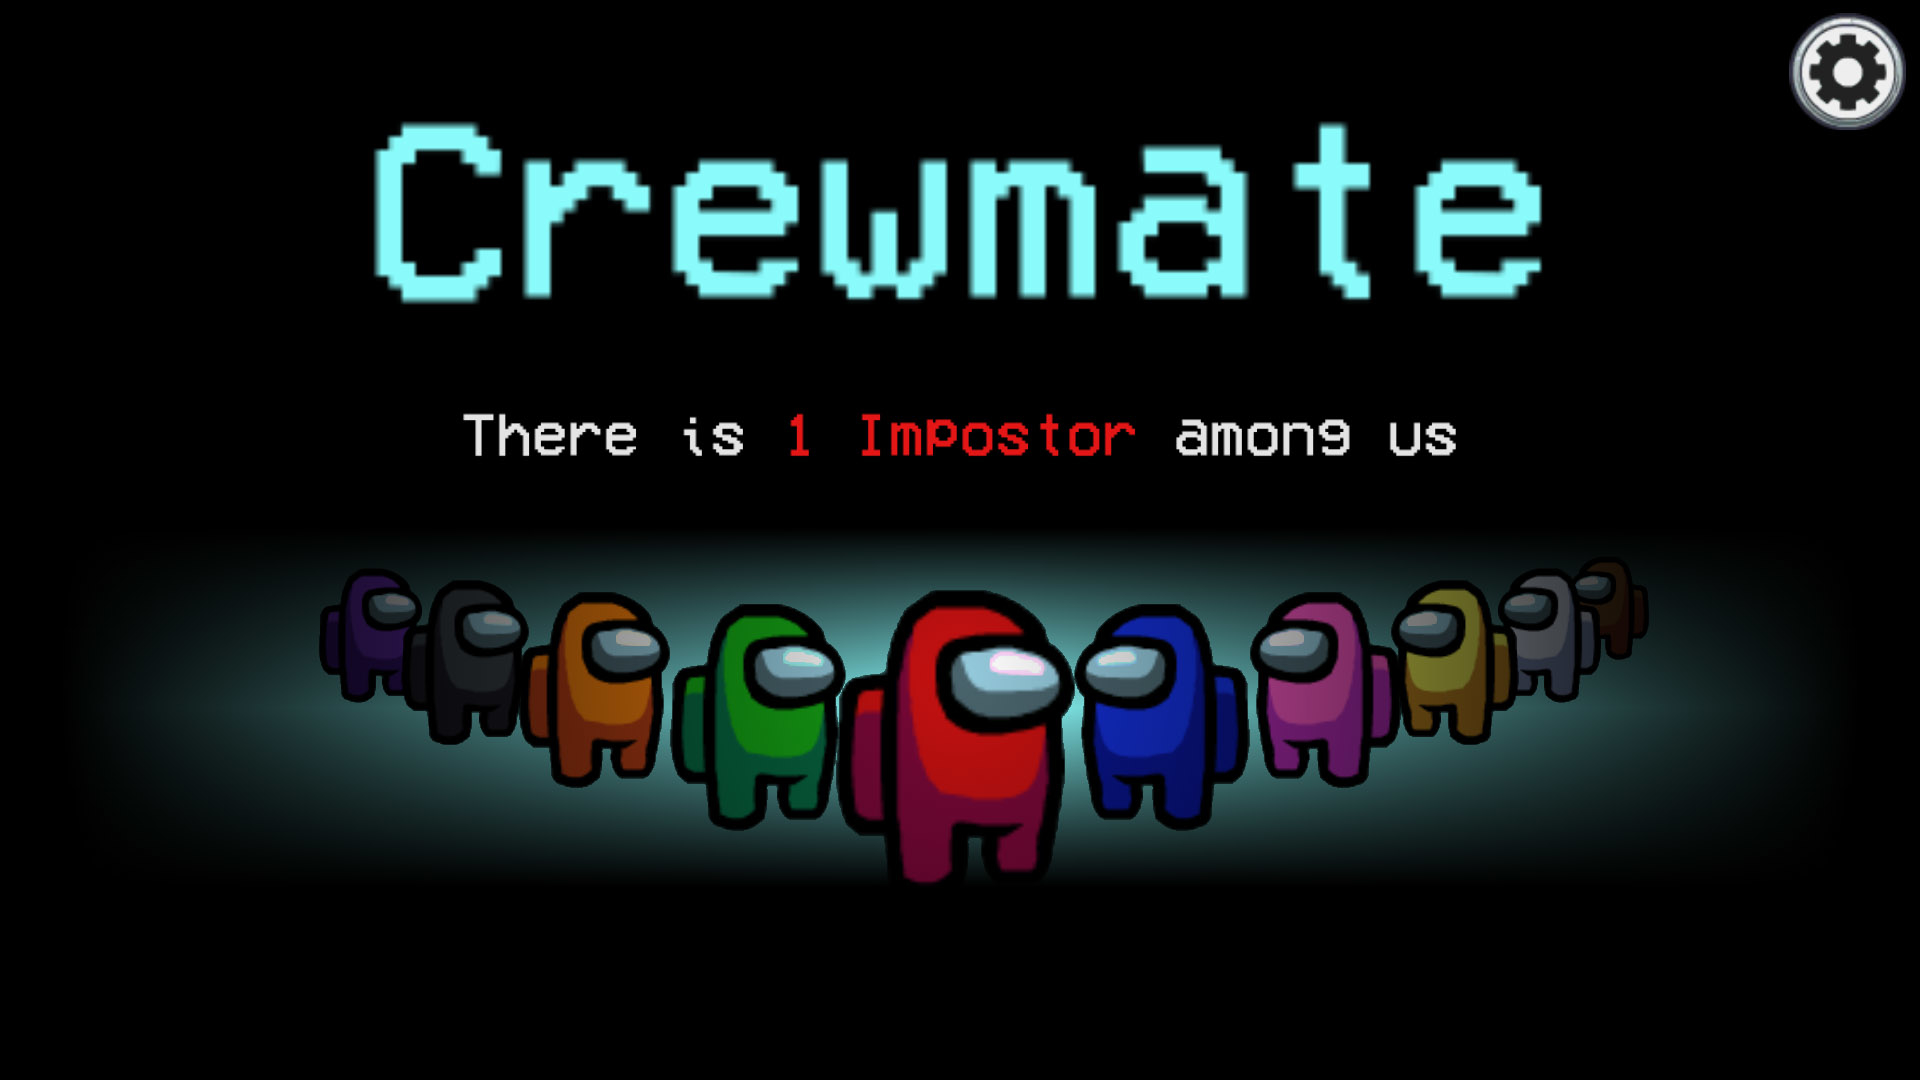 There is 1 Imposter Crewmate Among Us Wallpaper, HD Games 4K Wallpapers